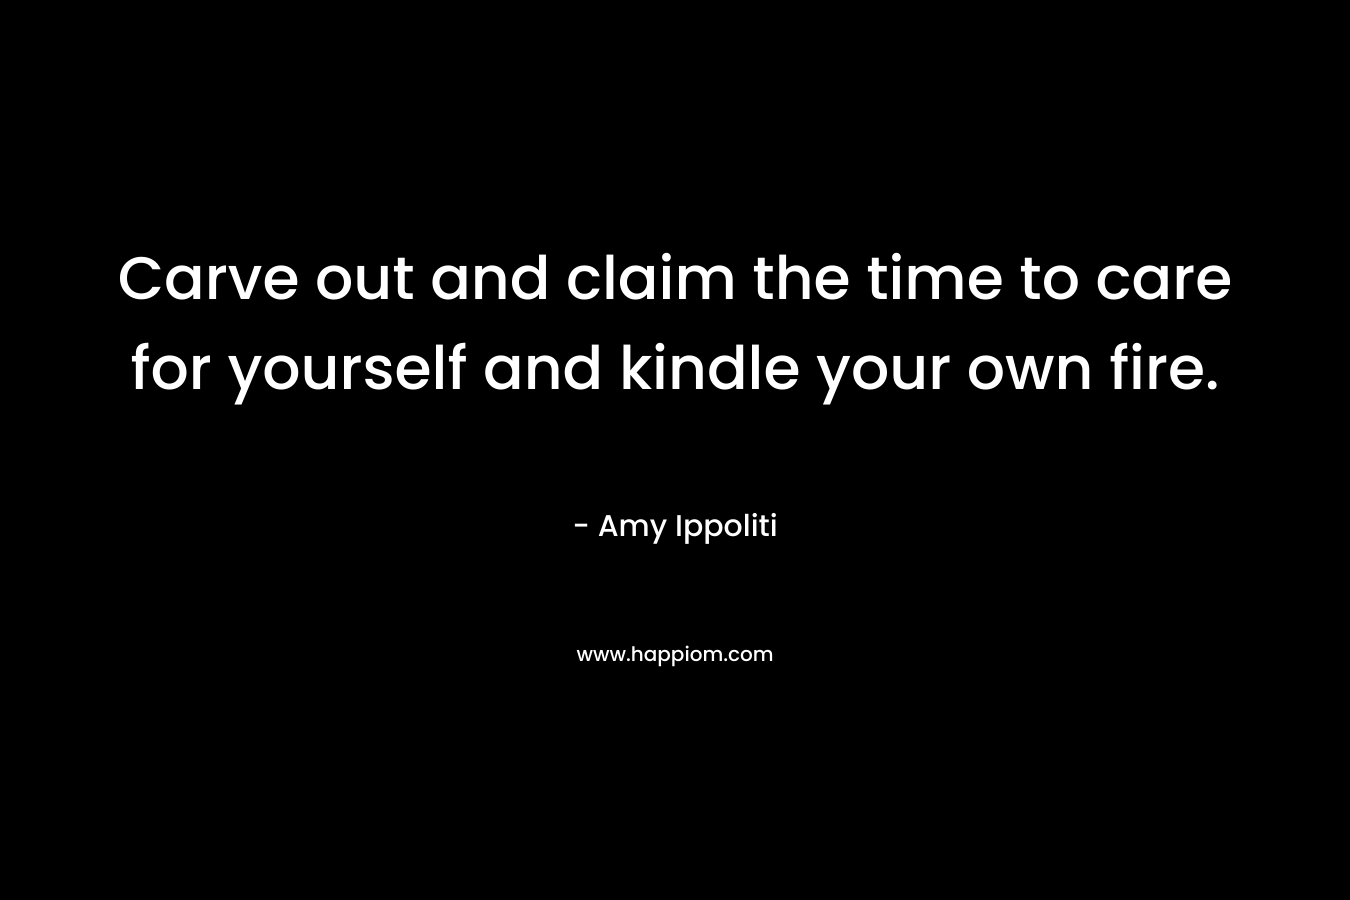 Carve out and claim the time to care for yourself and kindle your own fire. – Amy Ippoliti